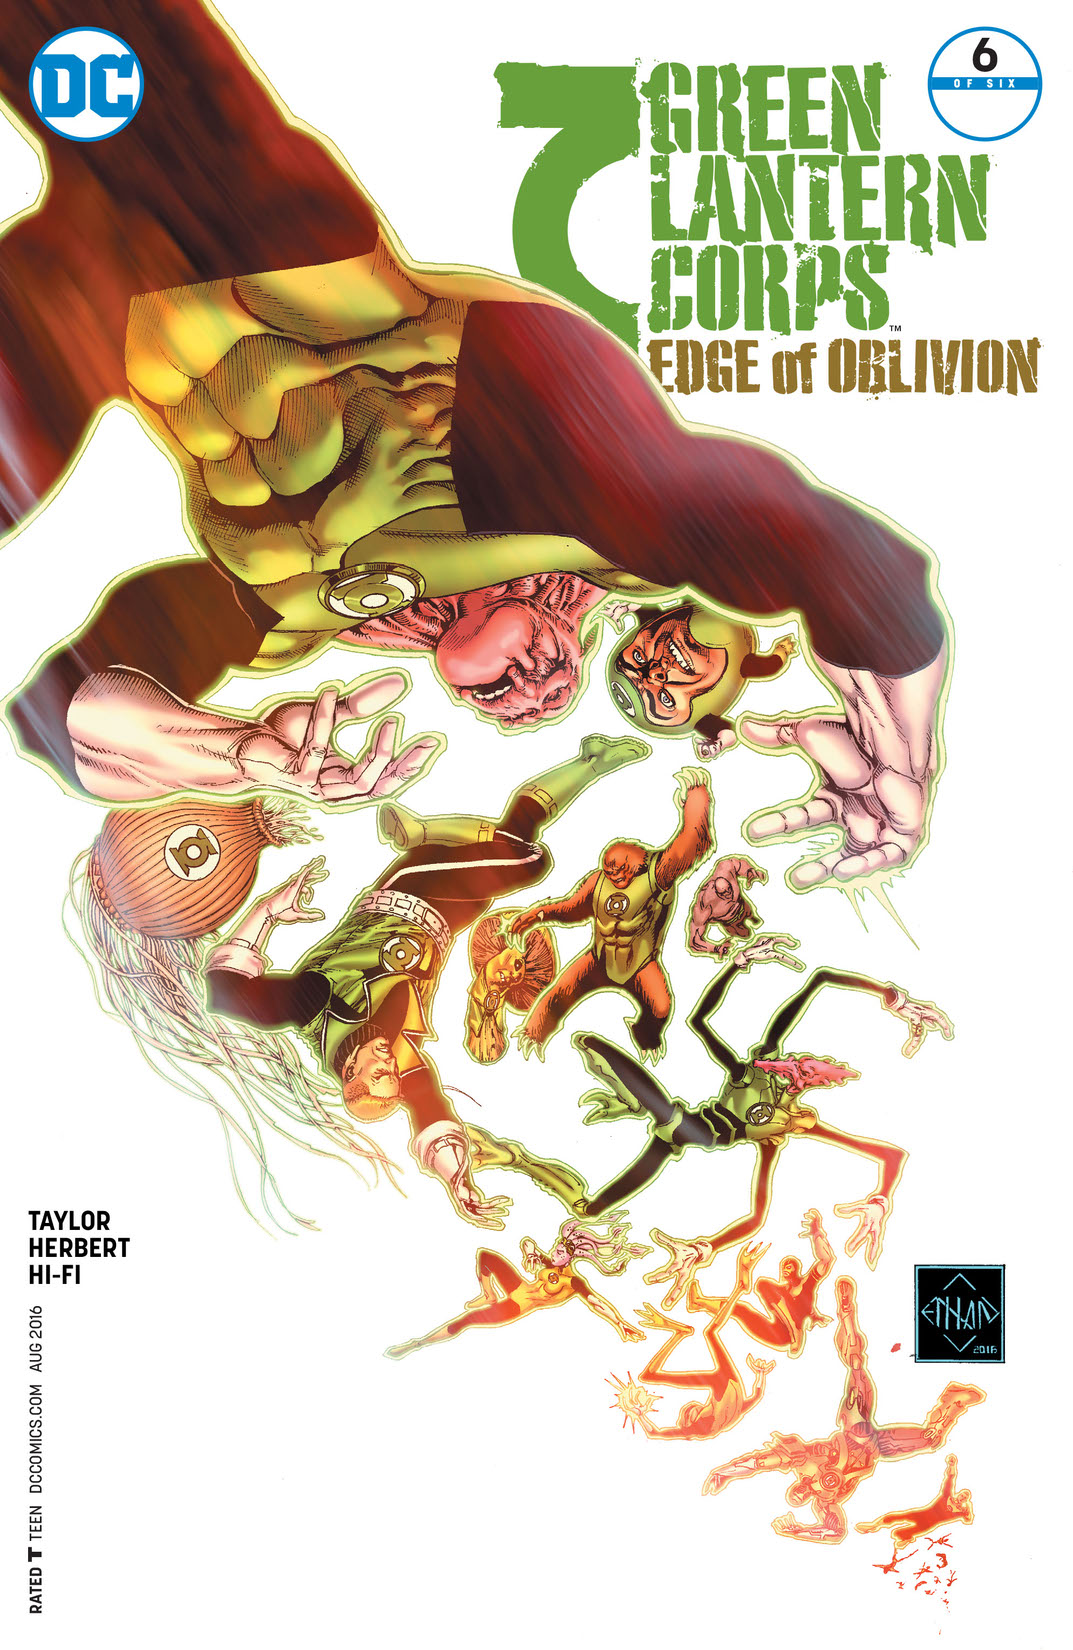 Green Lantern Corps: Edge of Oblivion #6 preview images